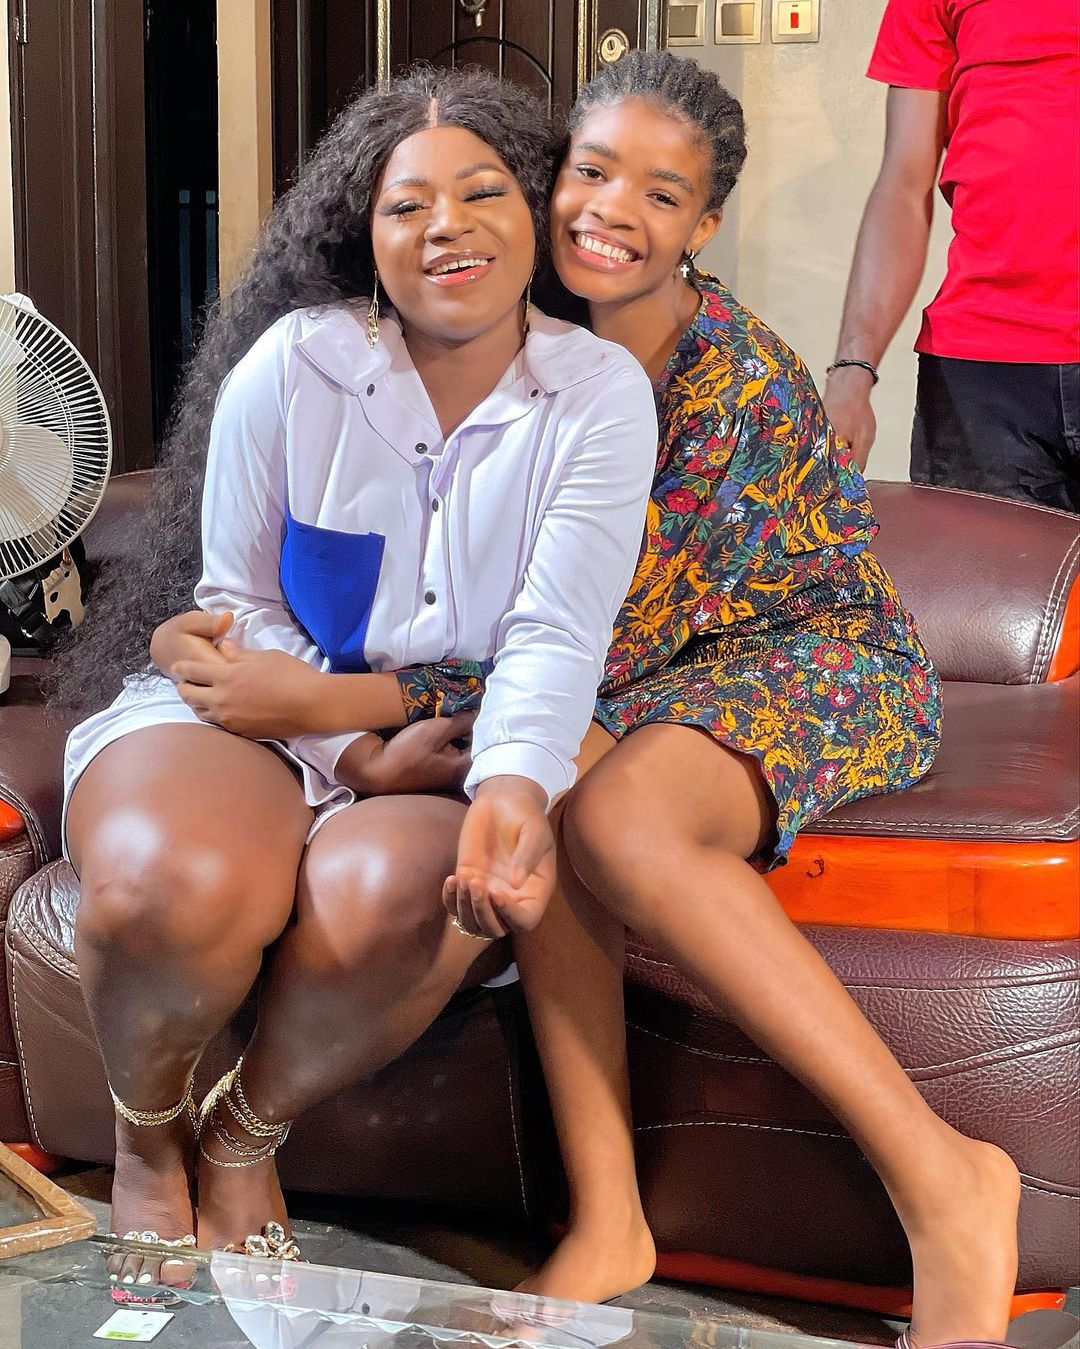 “You Hurt Me, But I Have Forgiven You” Destiny Etiko Tells Daughter As They Reconcile